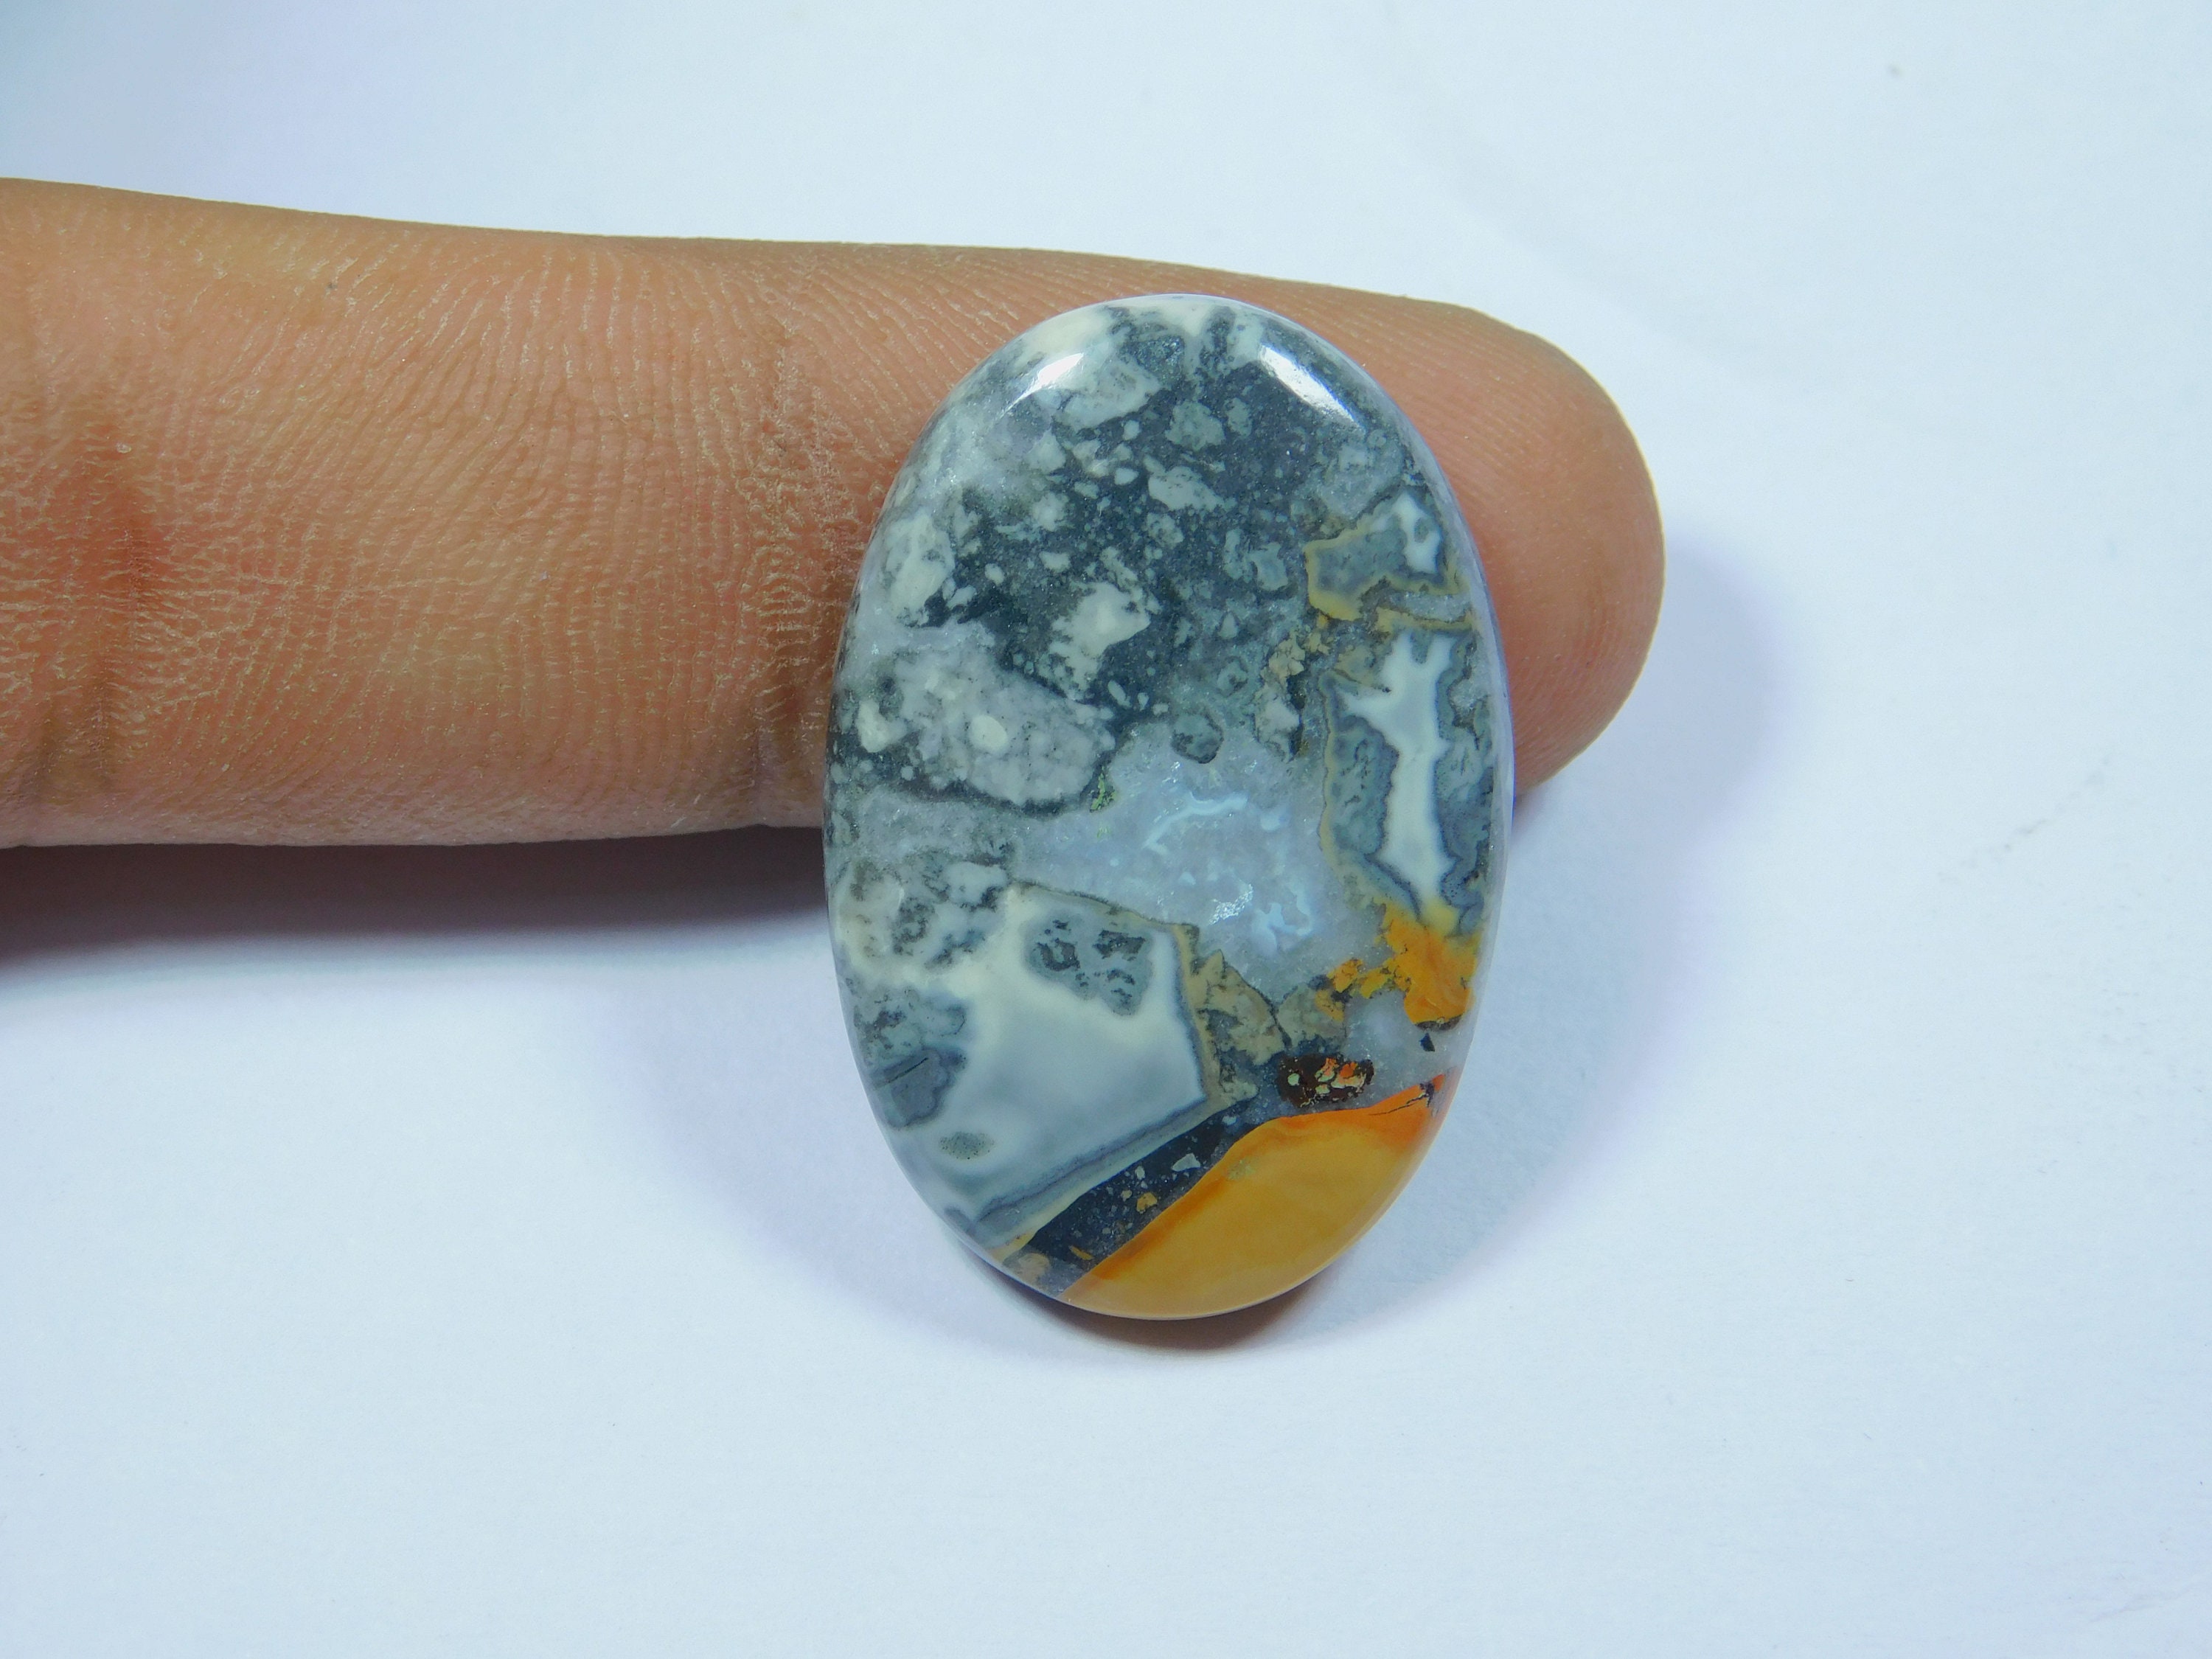 !!Natural Maligano Jasper Cabochon Top Quality Handcraft Gemstone Semi Cabochon Loose Stone Making For Jewelry 54 Ct#3608 AAA